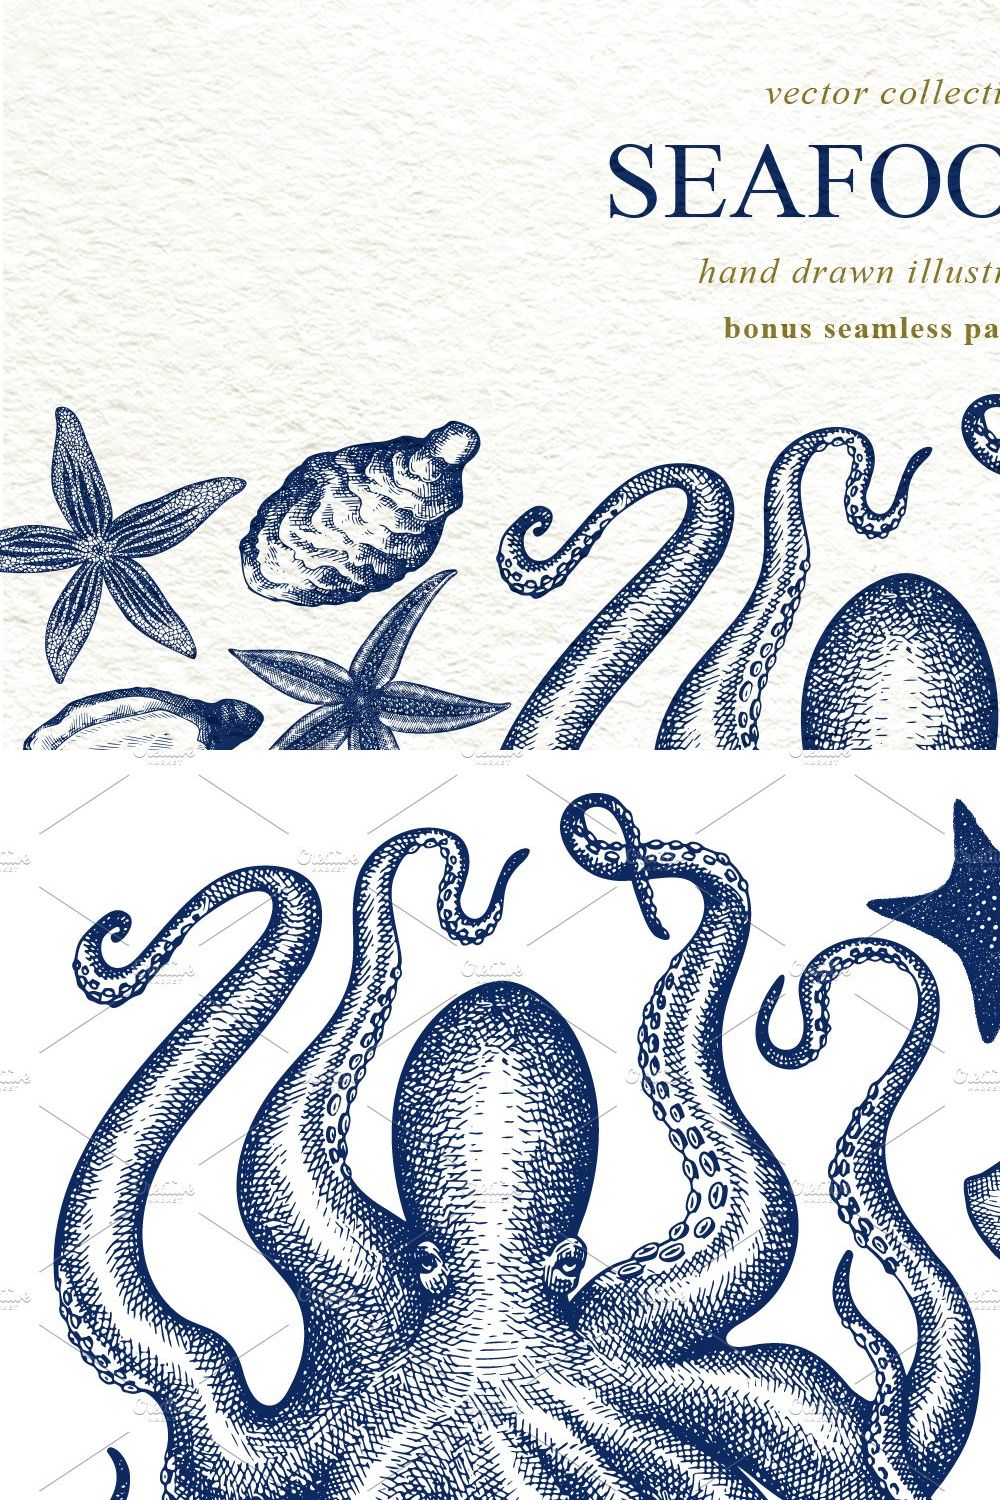 Seafood Vector Collection #2 pinterest preview image.